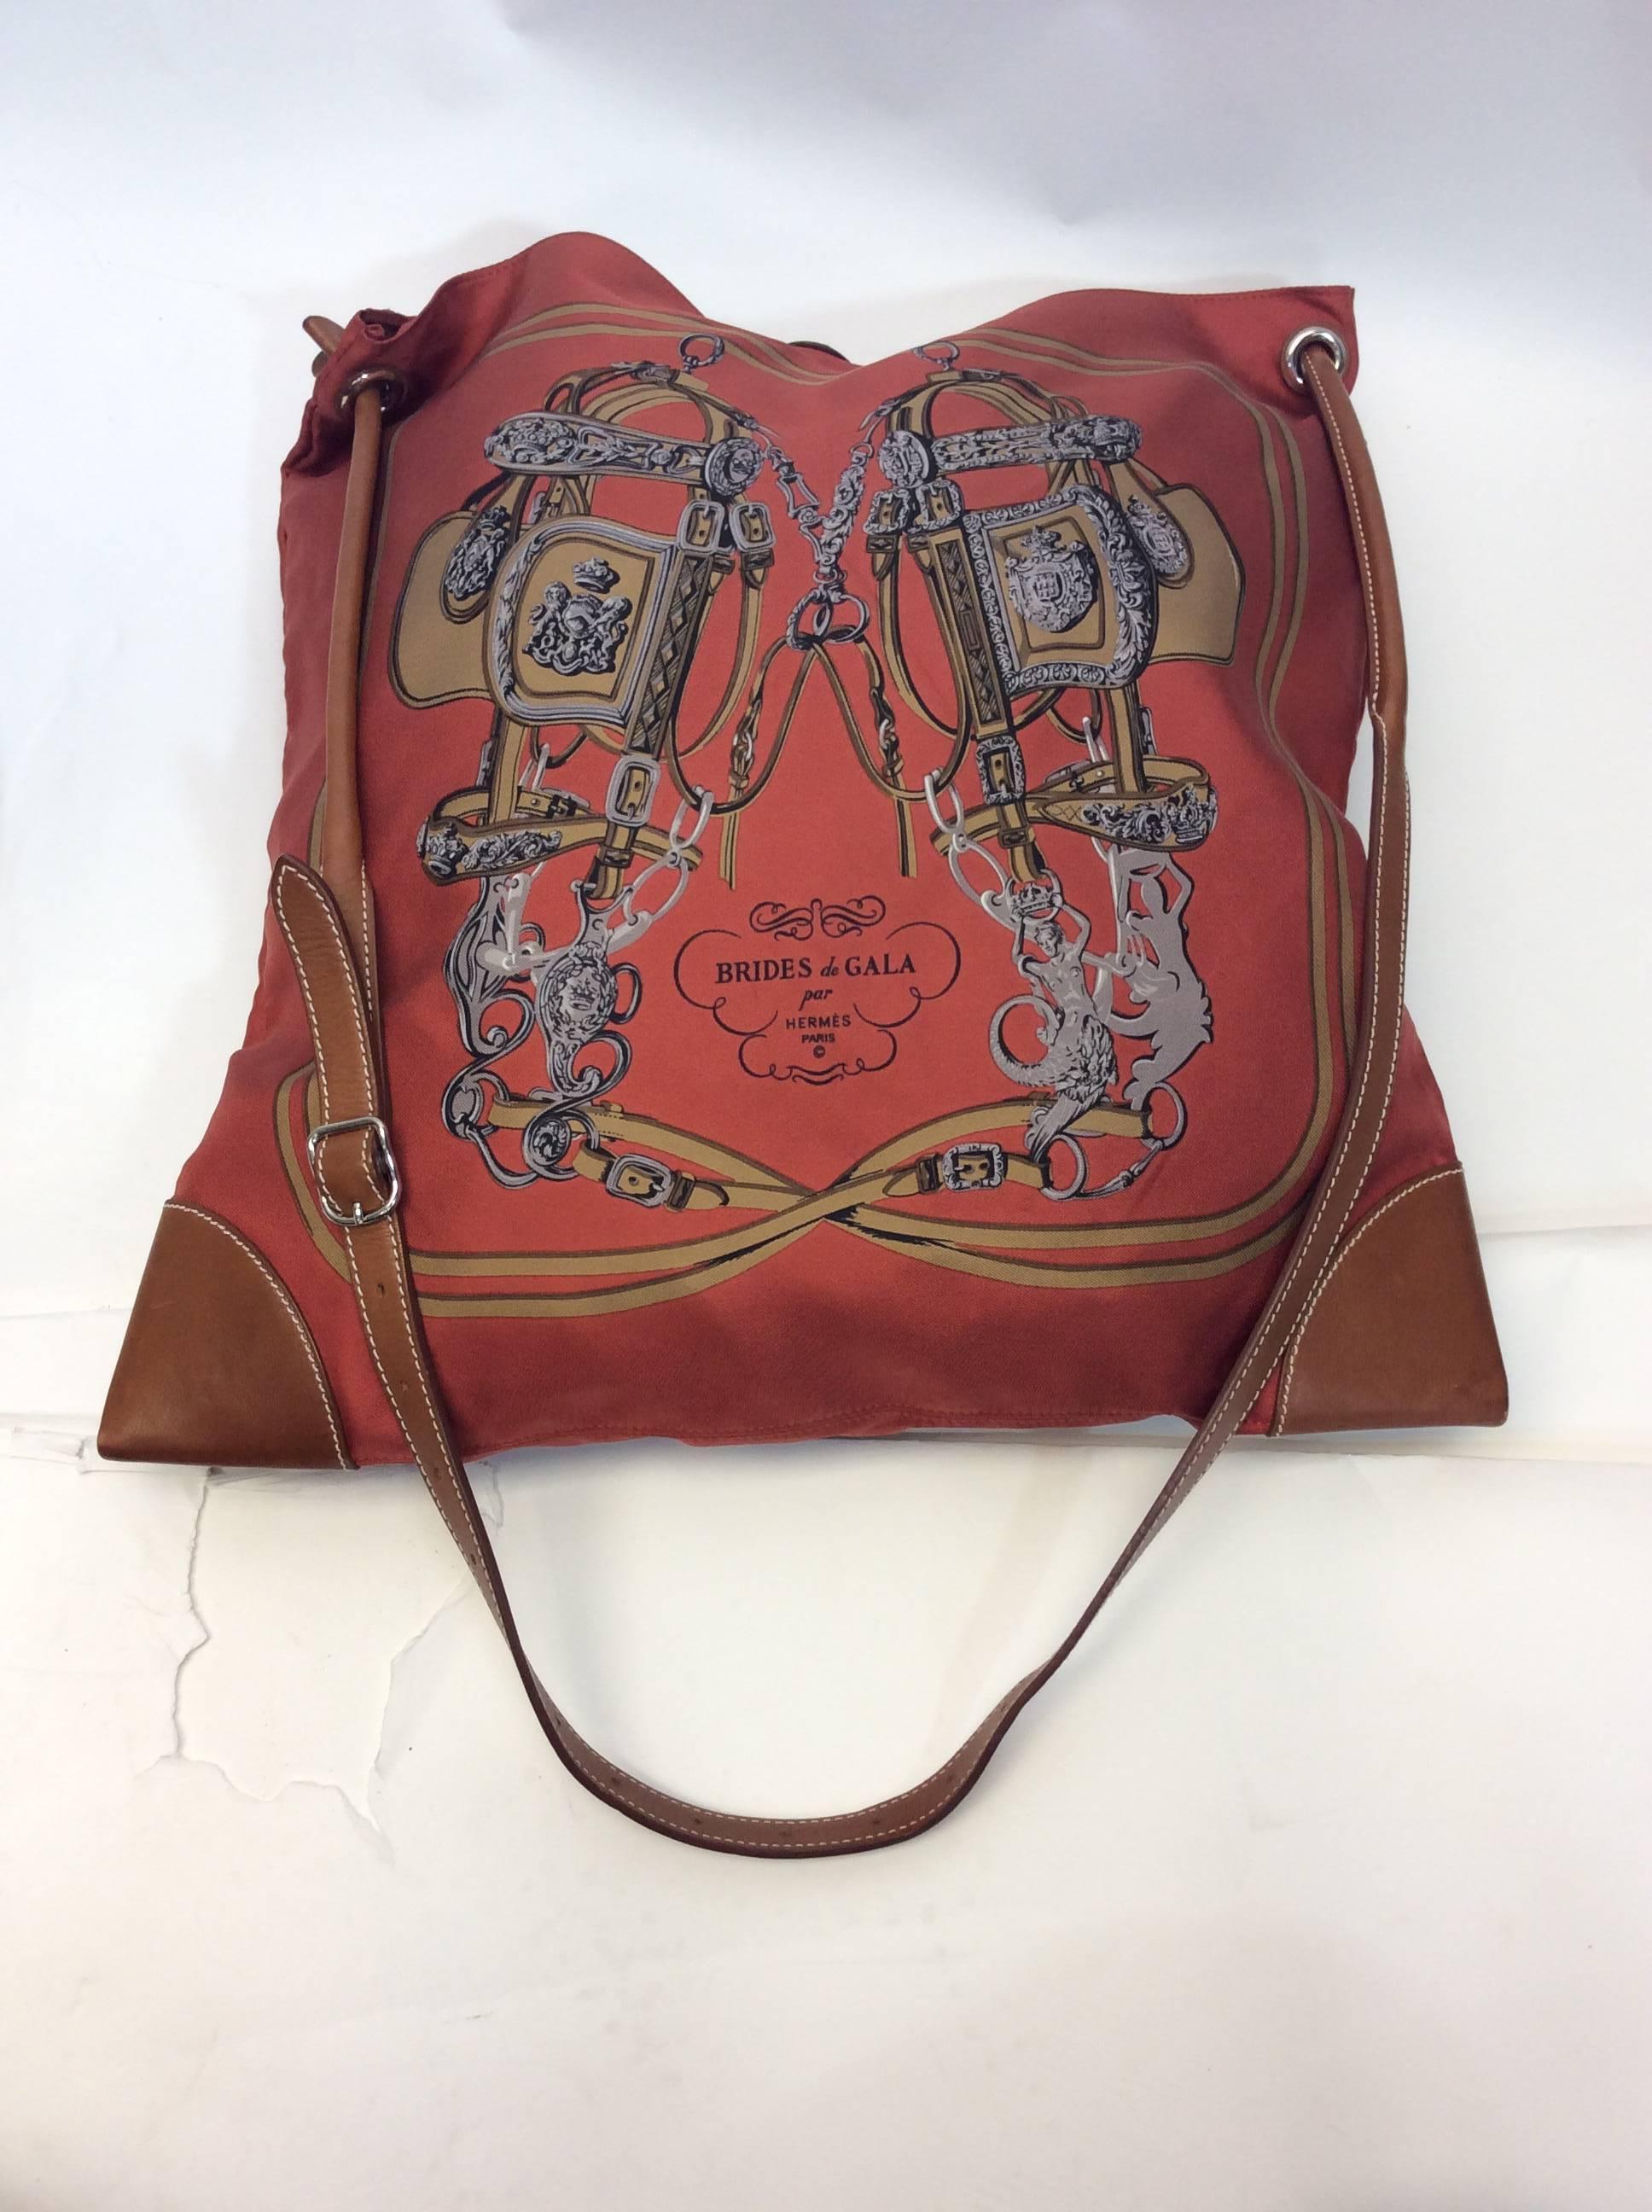 Hermes Silky City Silk And Leather Crossbody
Brides De Gala silk print
Open top closure 
Strap drop: 17 inches
Made in France
$999